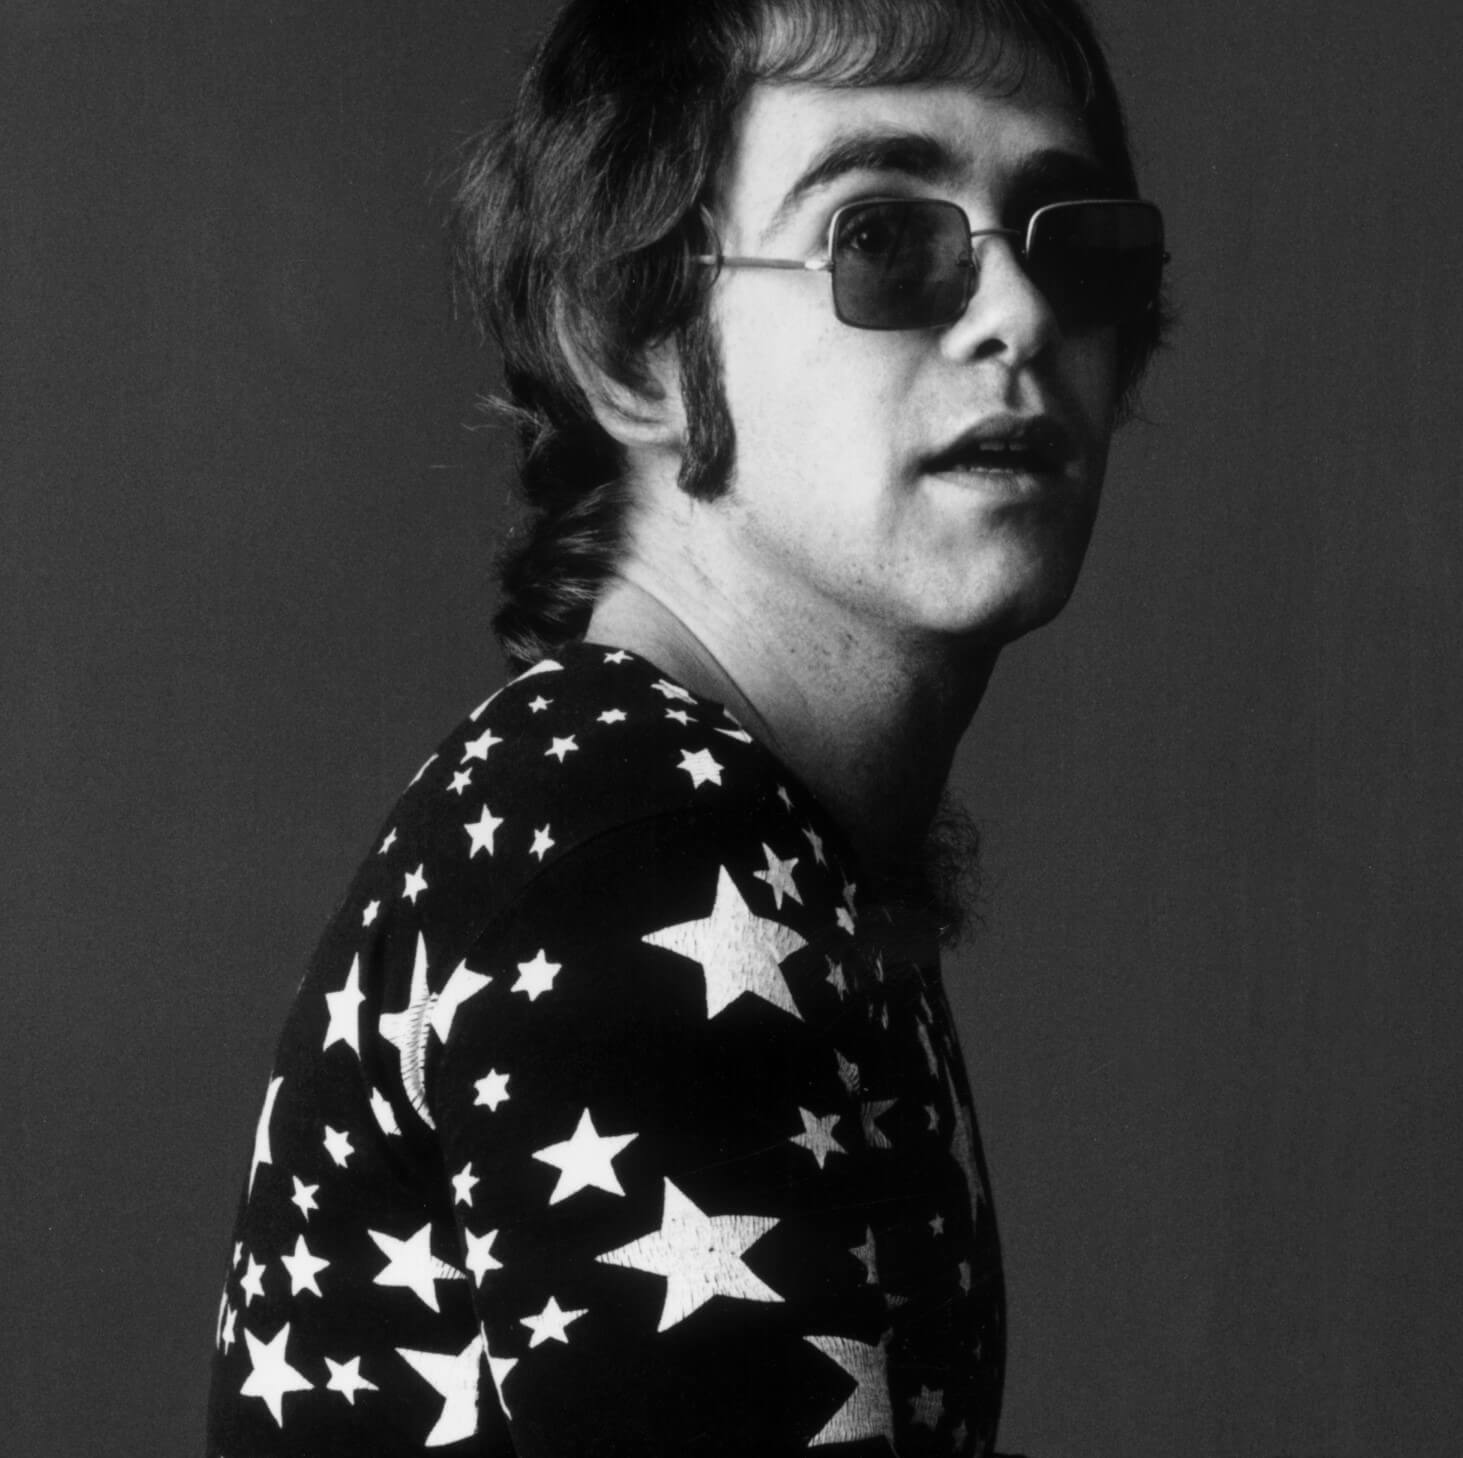 "Lucy in the Sky with Diamonds" singer Elton John wearing a starry shirt